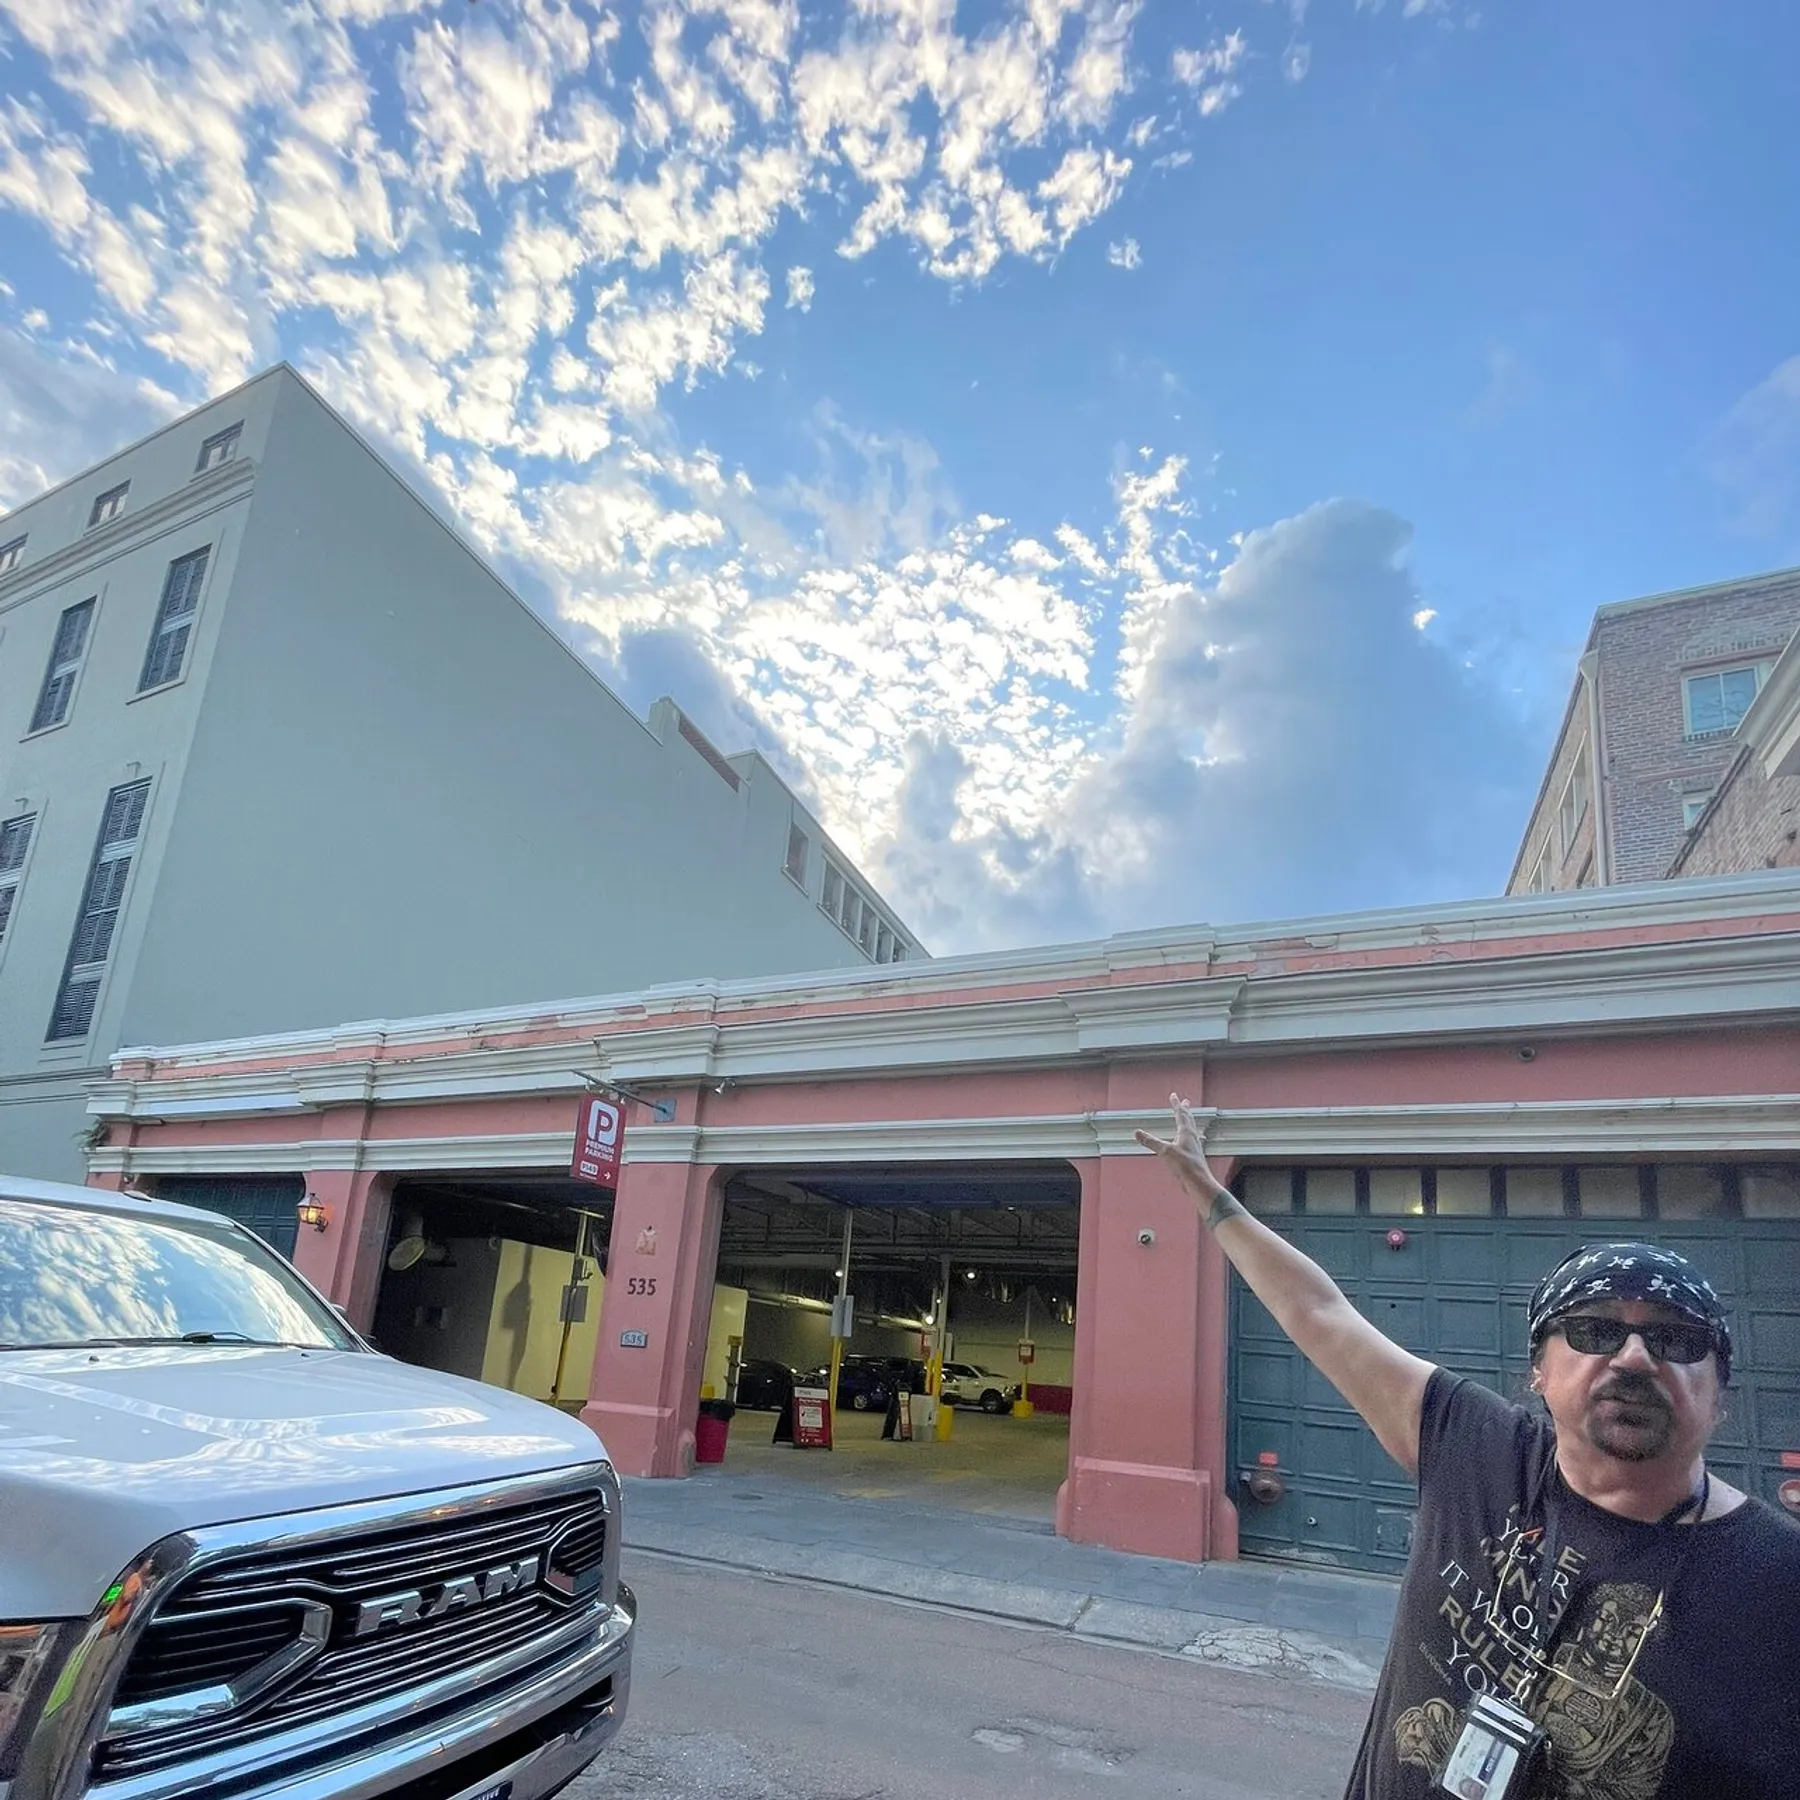 A man with sunglasses and a bandana is pointing upwards towards the beautiful sky next to an open-air parking structure with a pickup truck in the foreground.